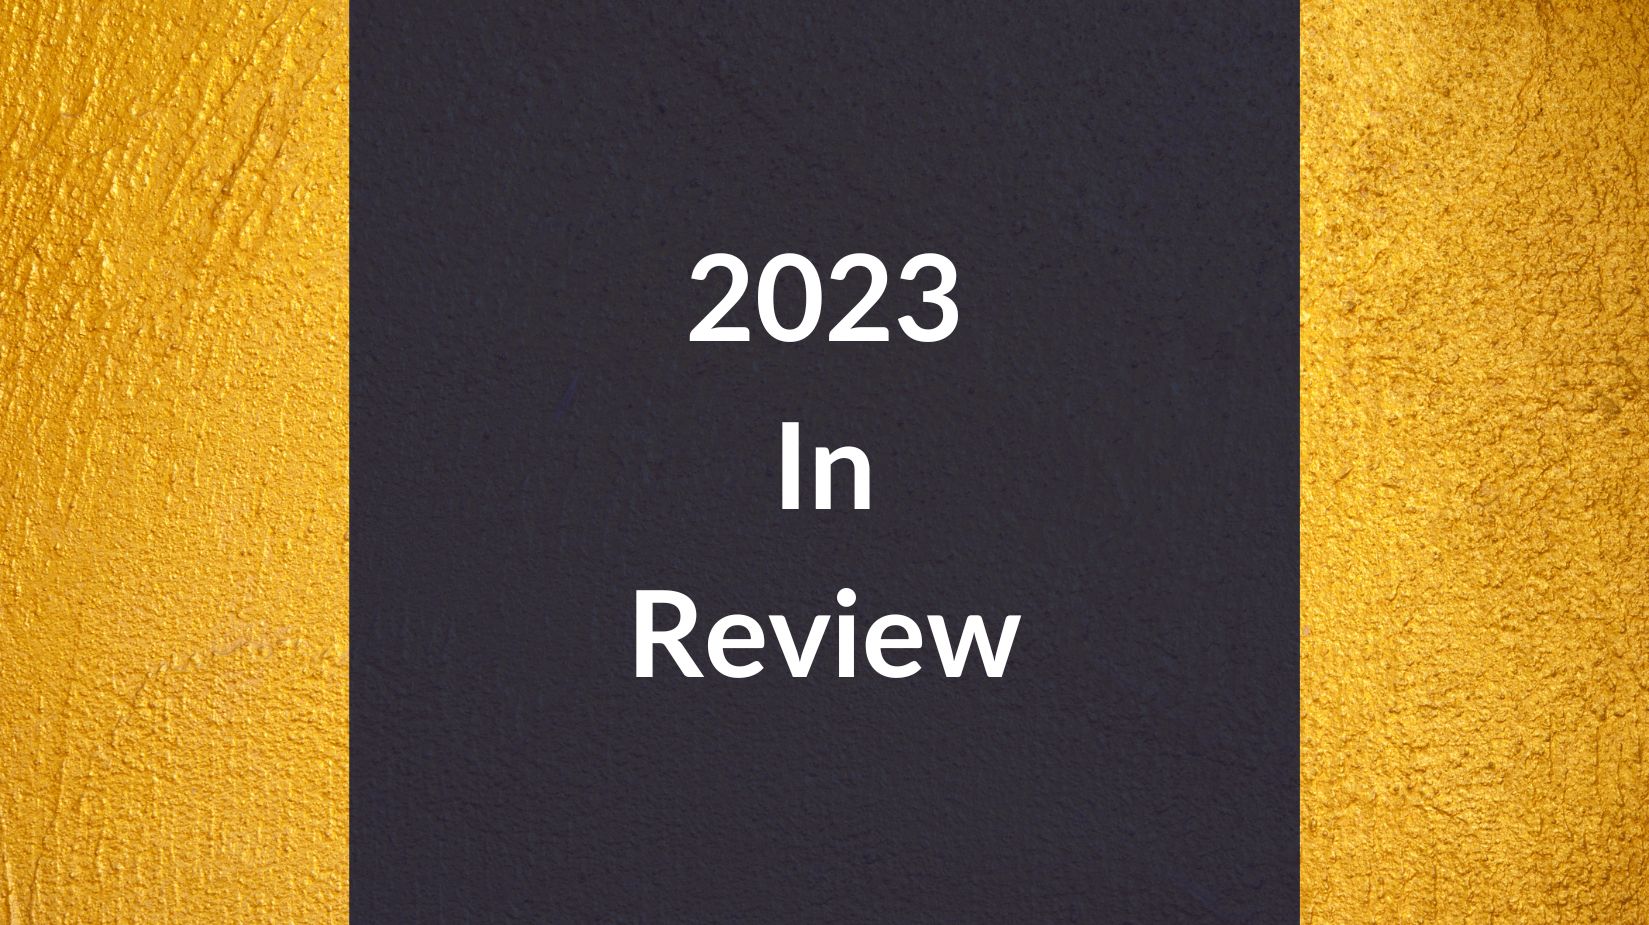 NT 2023 in Review